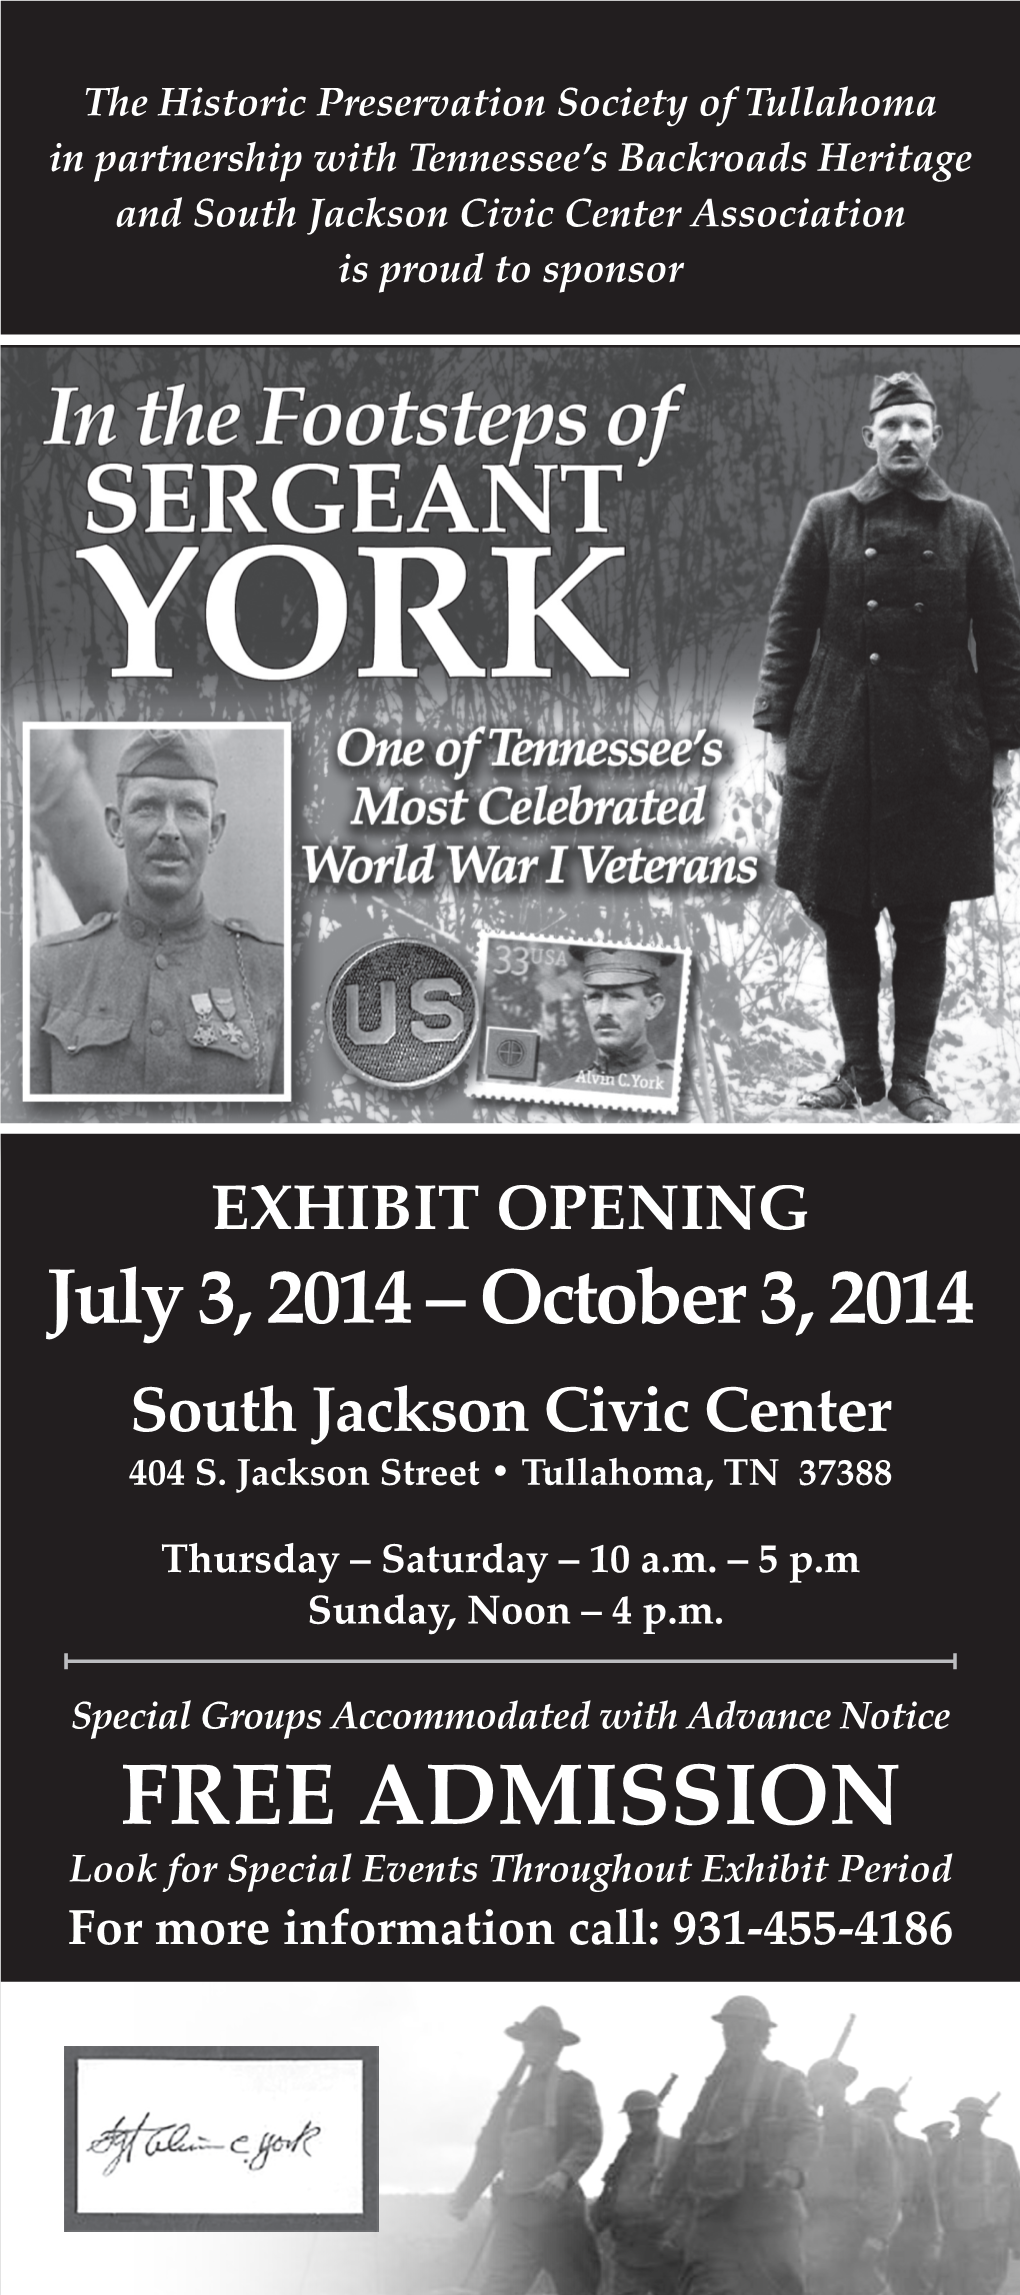 FREE ADMISSION Look for Special Events Throughout Exhibit Period for More Information Call: 931-455-4186 SERGEANT ALVIN C